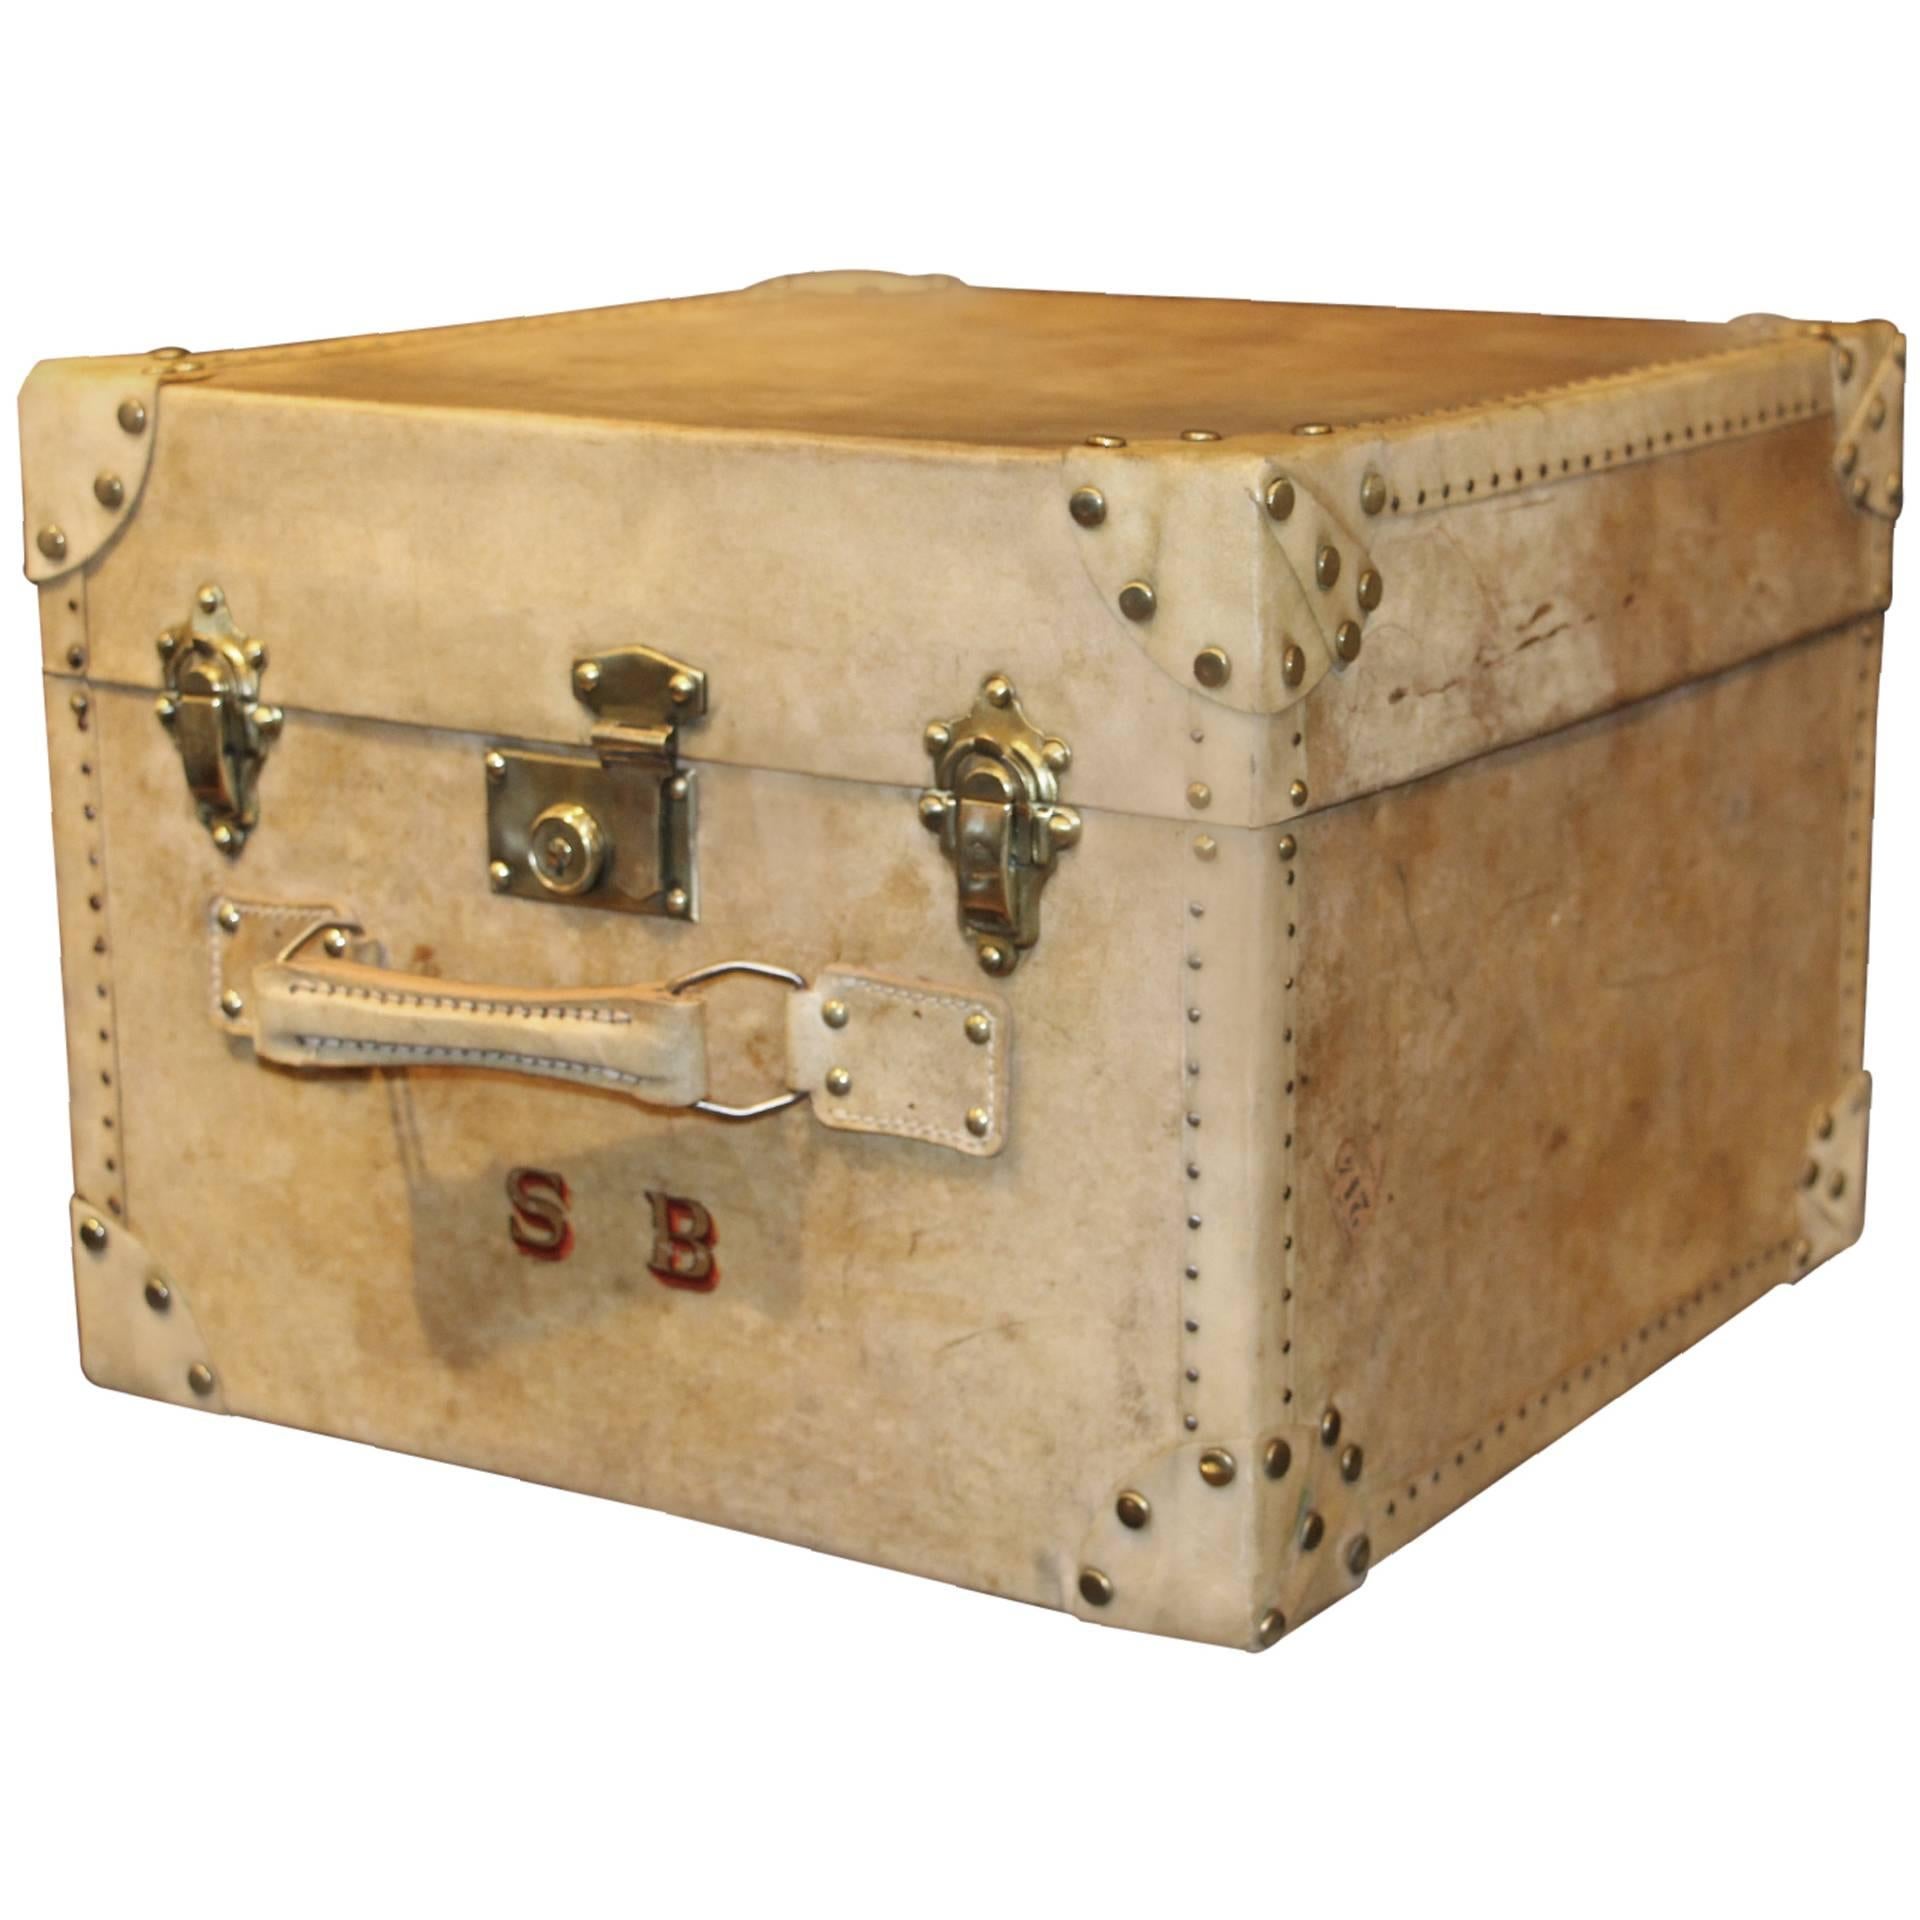 1920s Vellum Rectangular Hat Trunk with Handle on the Front